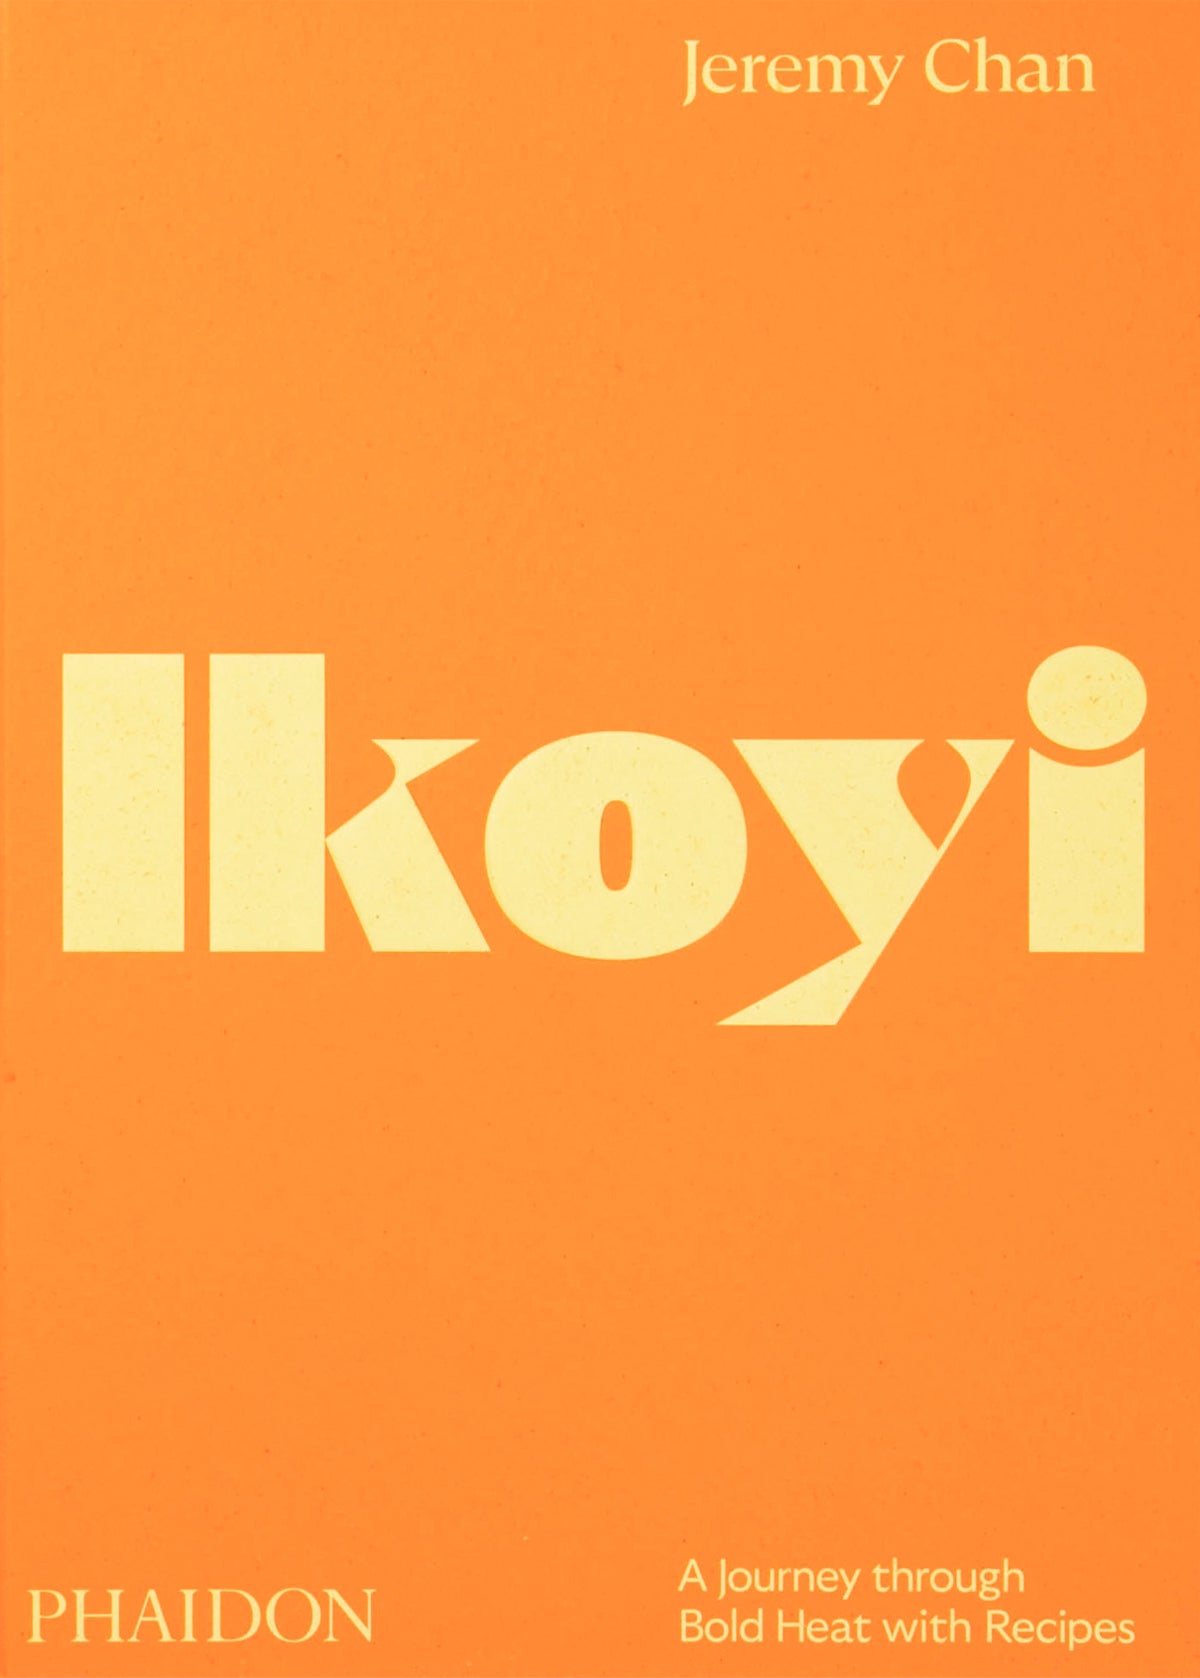 Ikoyi, A Journey Through Bold Heat with Recipes